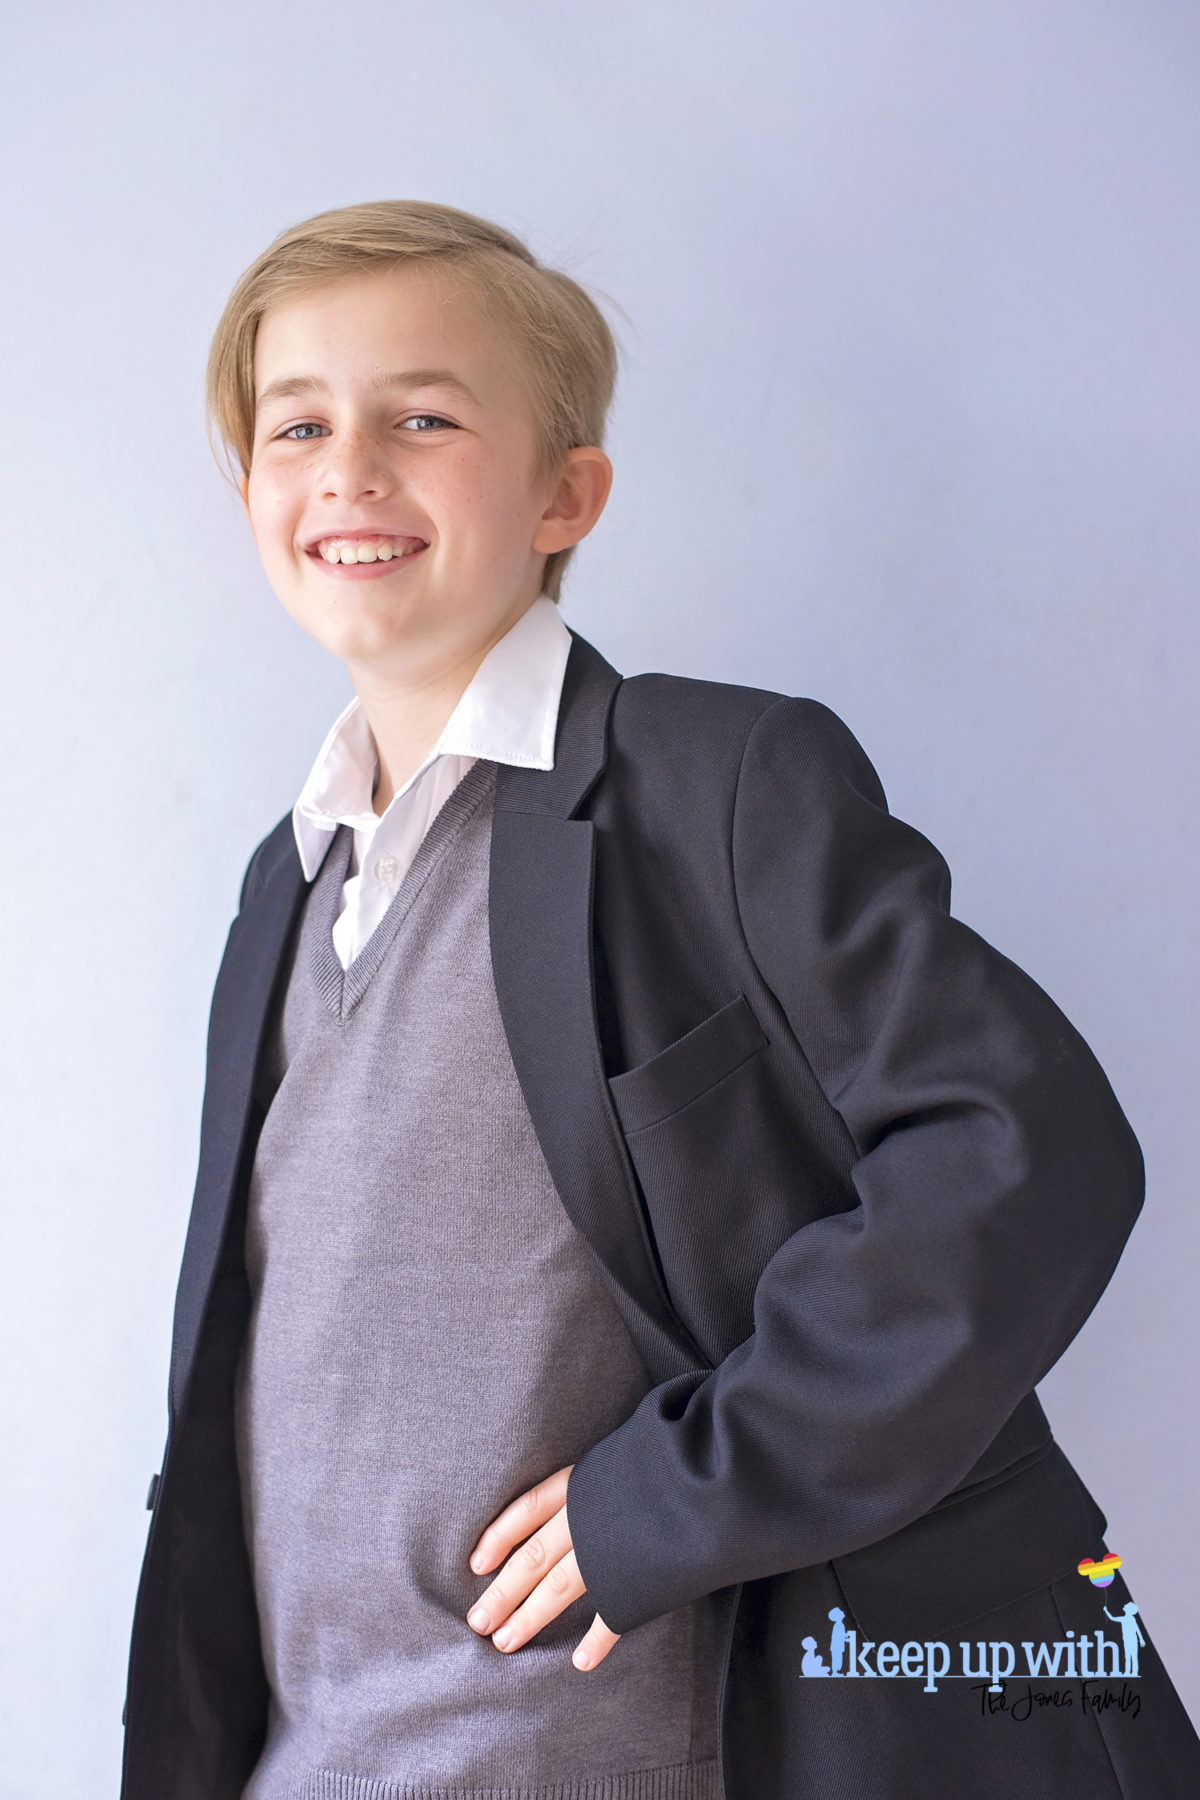 Image shows a boy wearing Trutex School Uniform. Black blazer, grey v-neck pullover and white shirt. Image by Sara-Jayne for Keep Up With The Jones Family